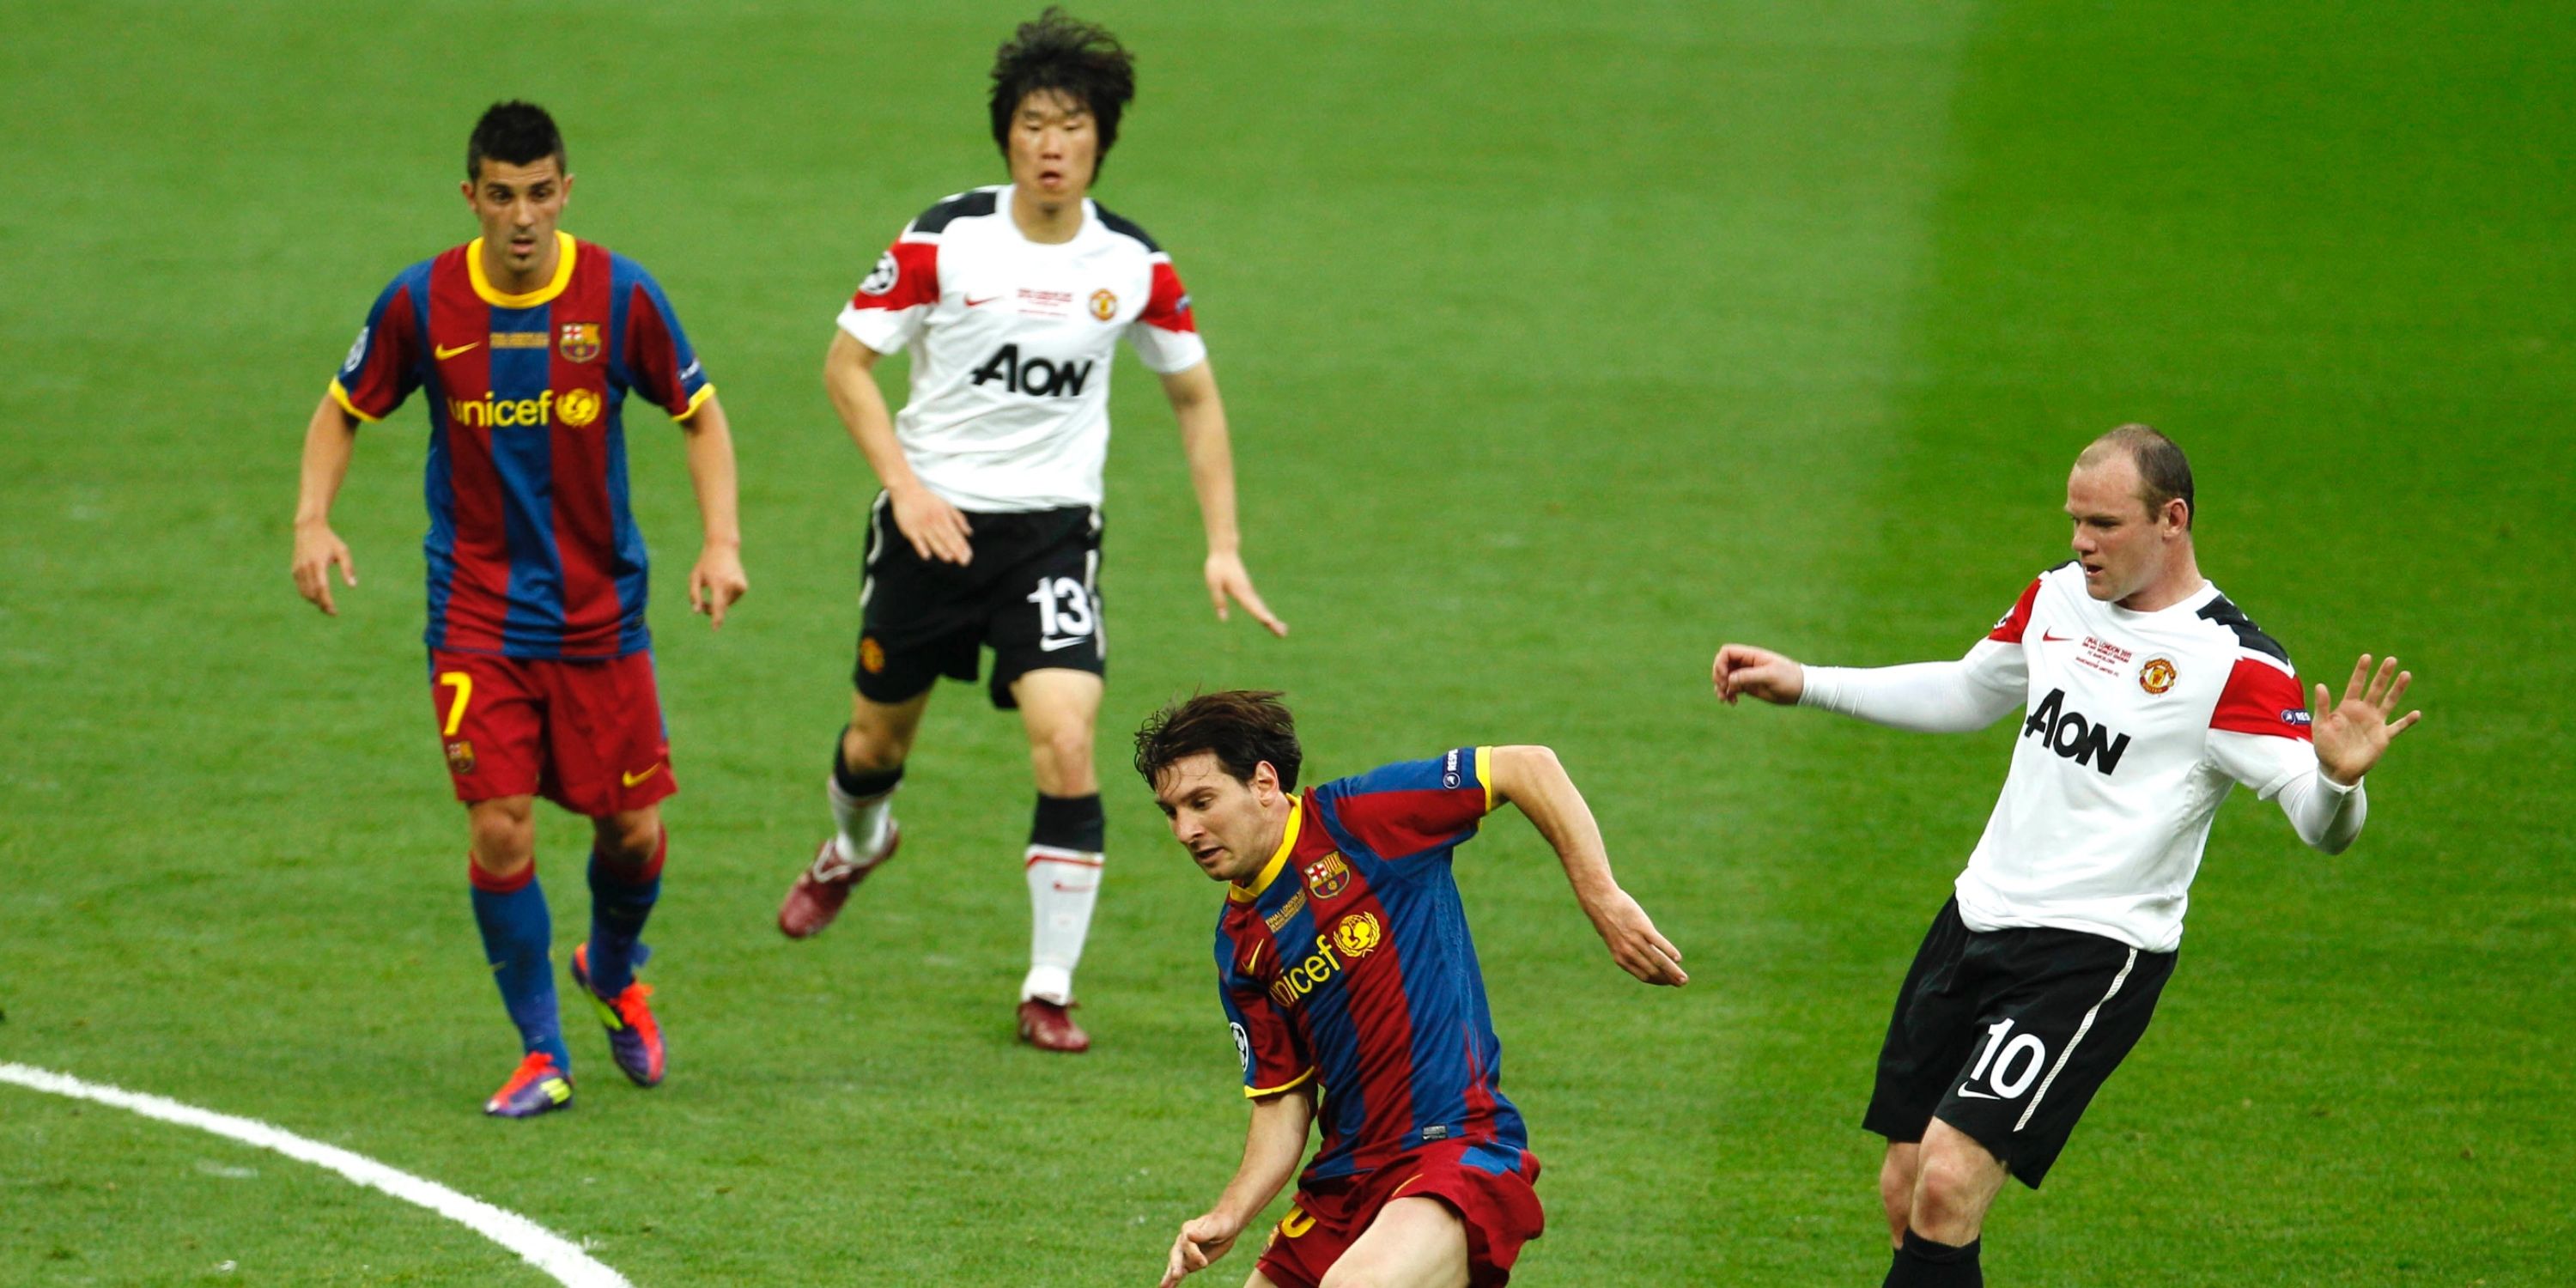 Park Ji-sung and Lionel Messi in the 2011 Champions League final